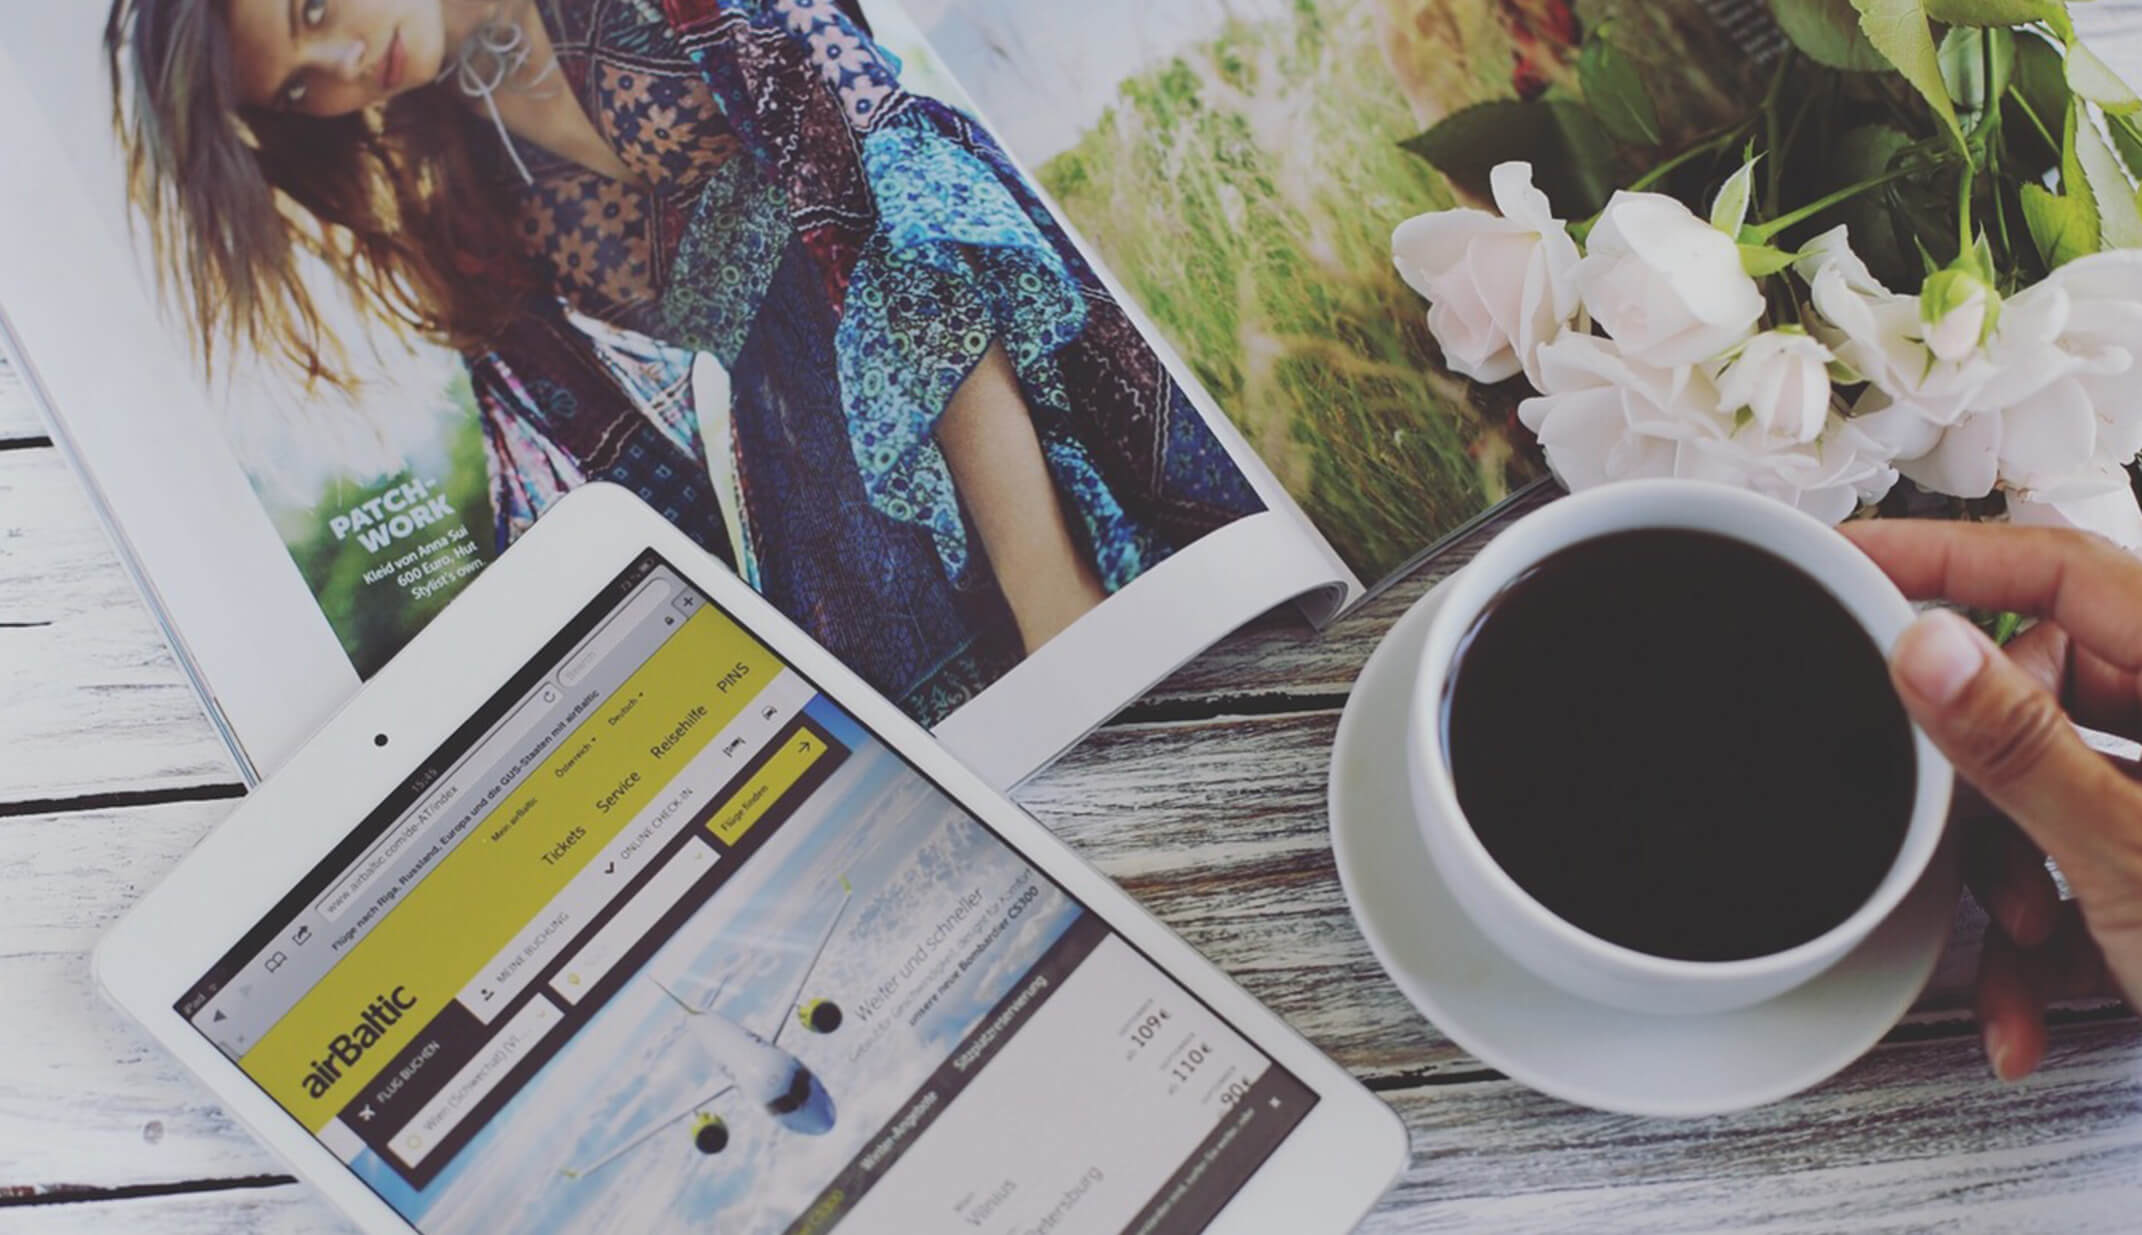 reading magazine fashion coffee passport flowers flat-lay hand fresh white branded app application travel ready planning travel real social UGC photography